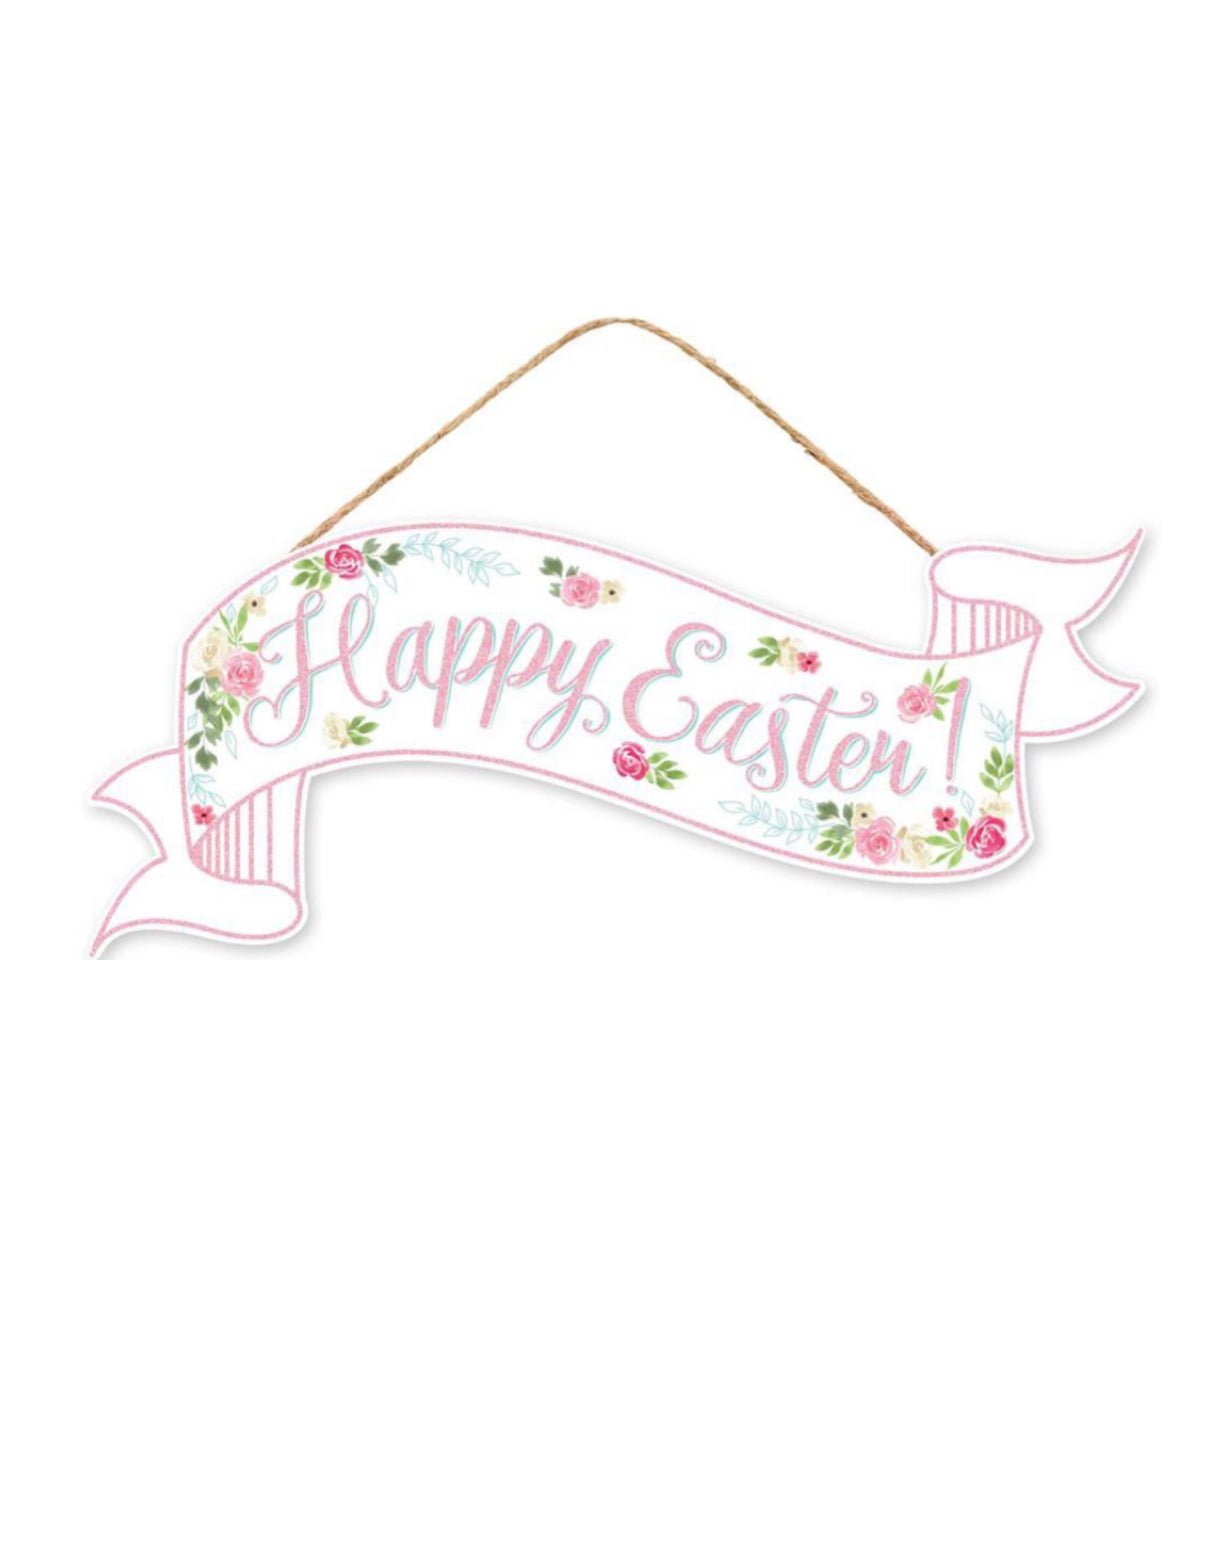 Happy easyer banner sign - Greenery Marketsigns for wreathsAP8865